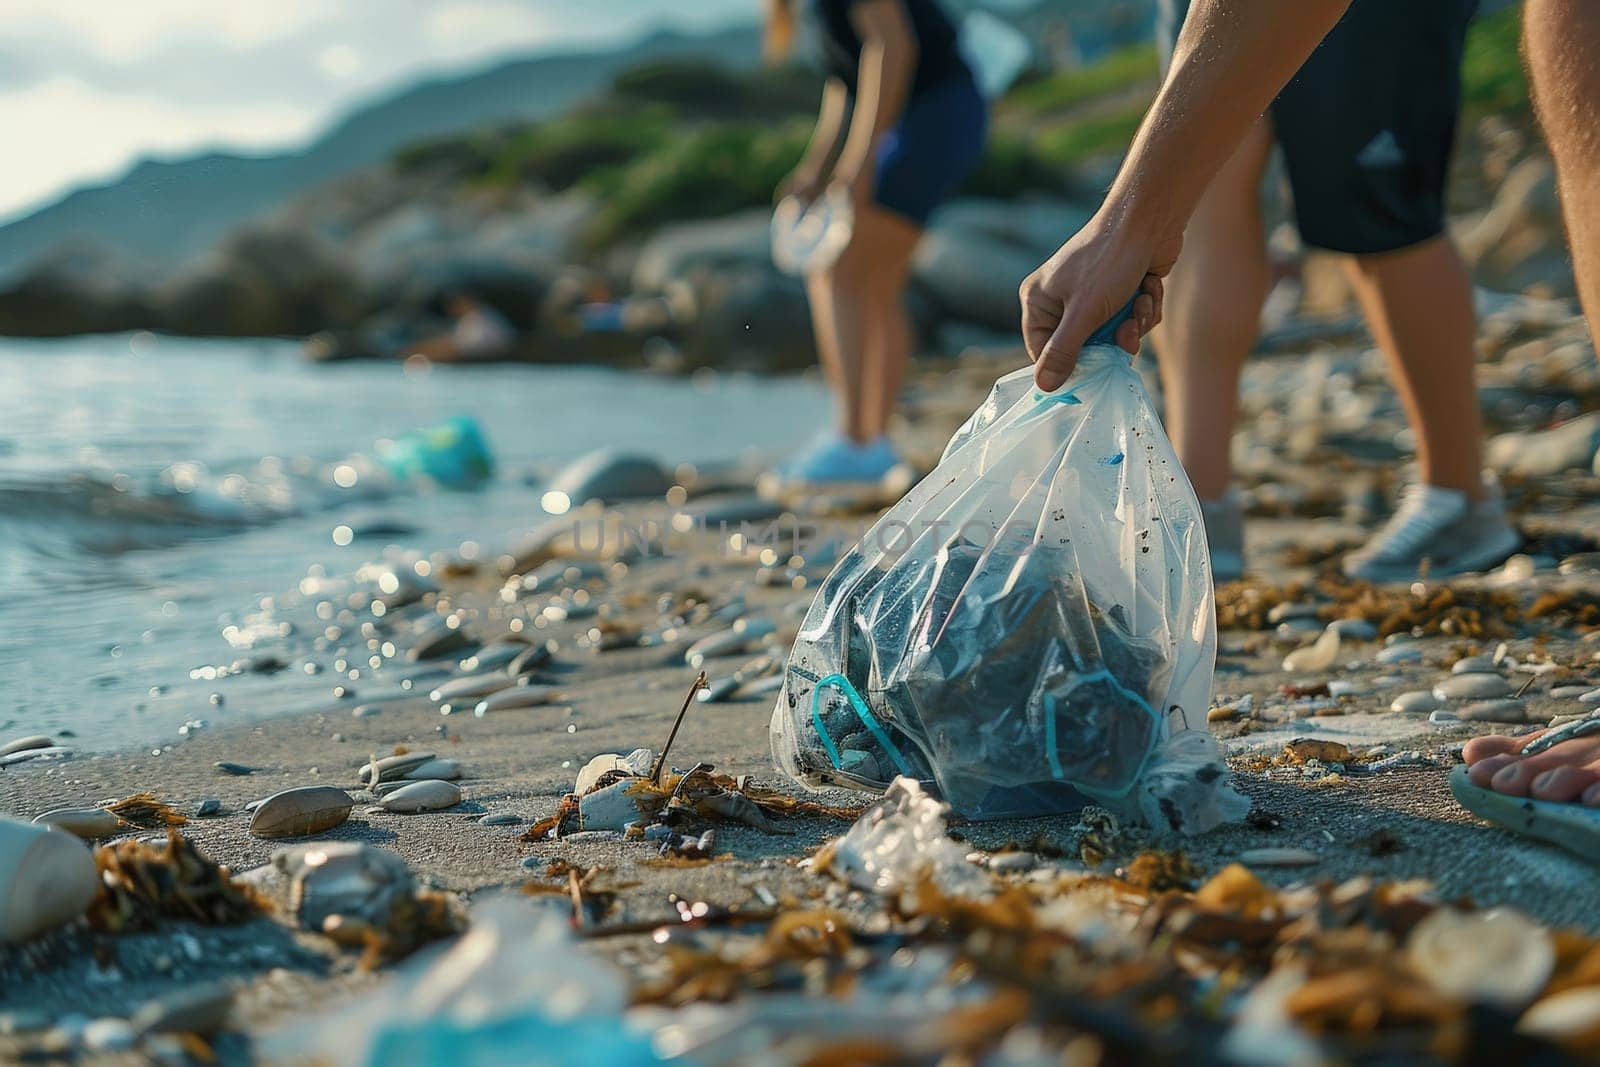 A person is holding a plastic bag on a beach, picking up trash by nateemee